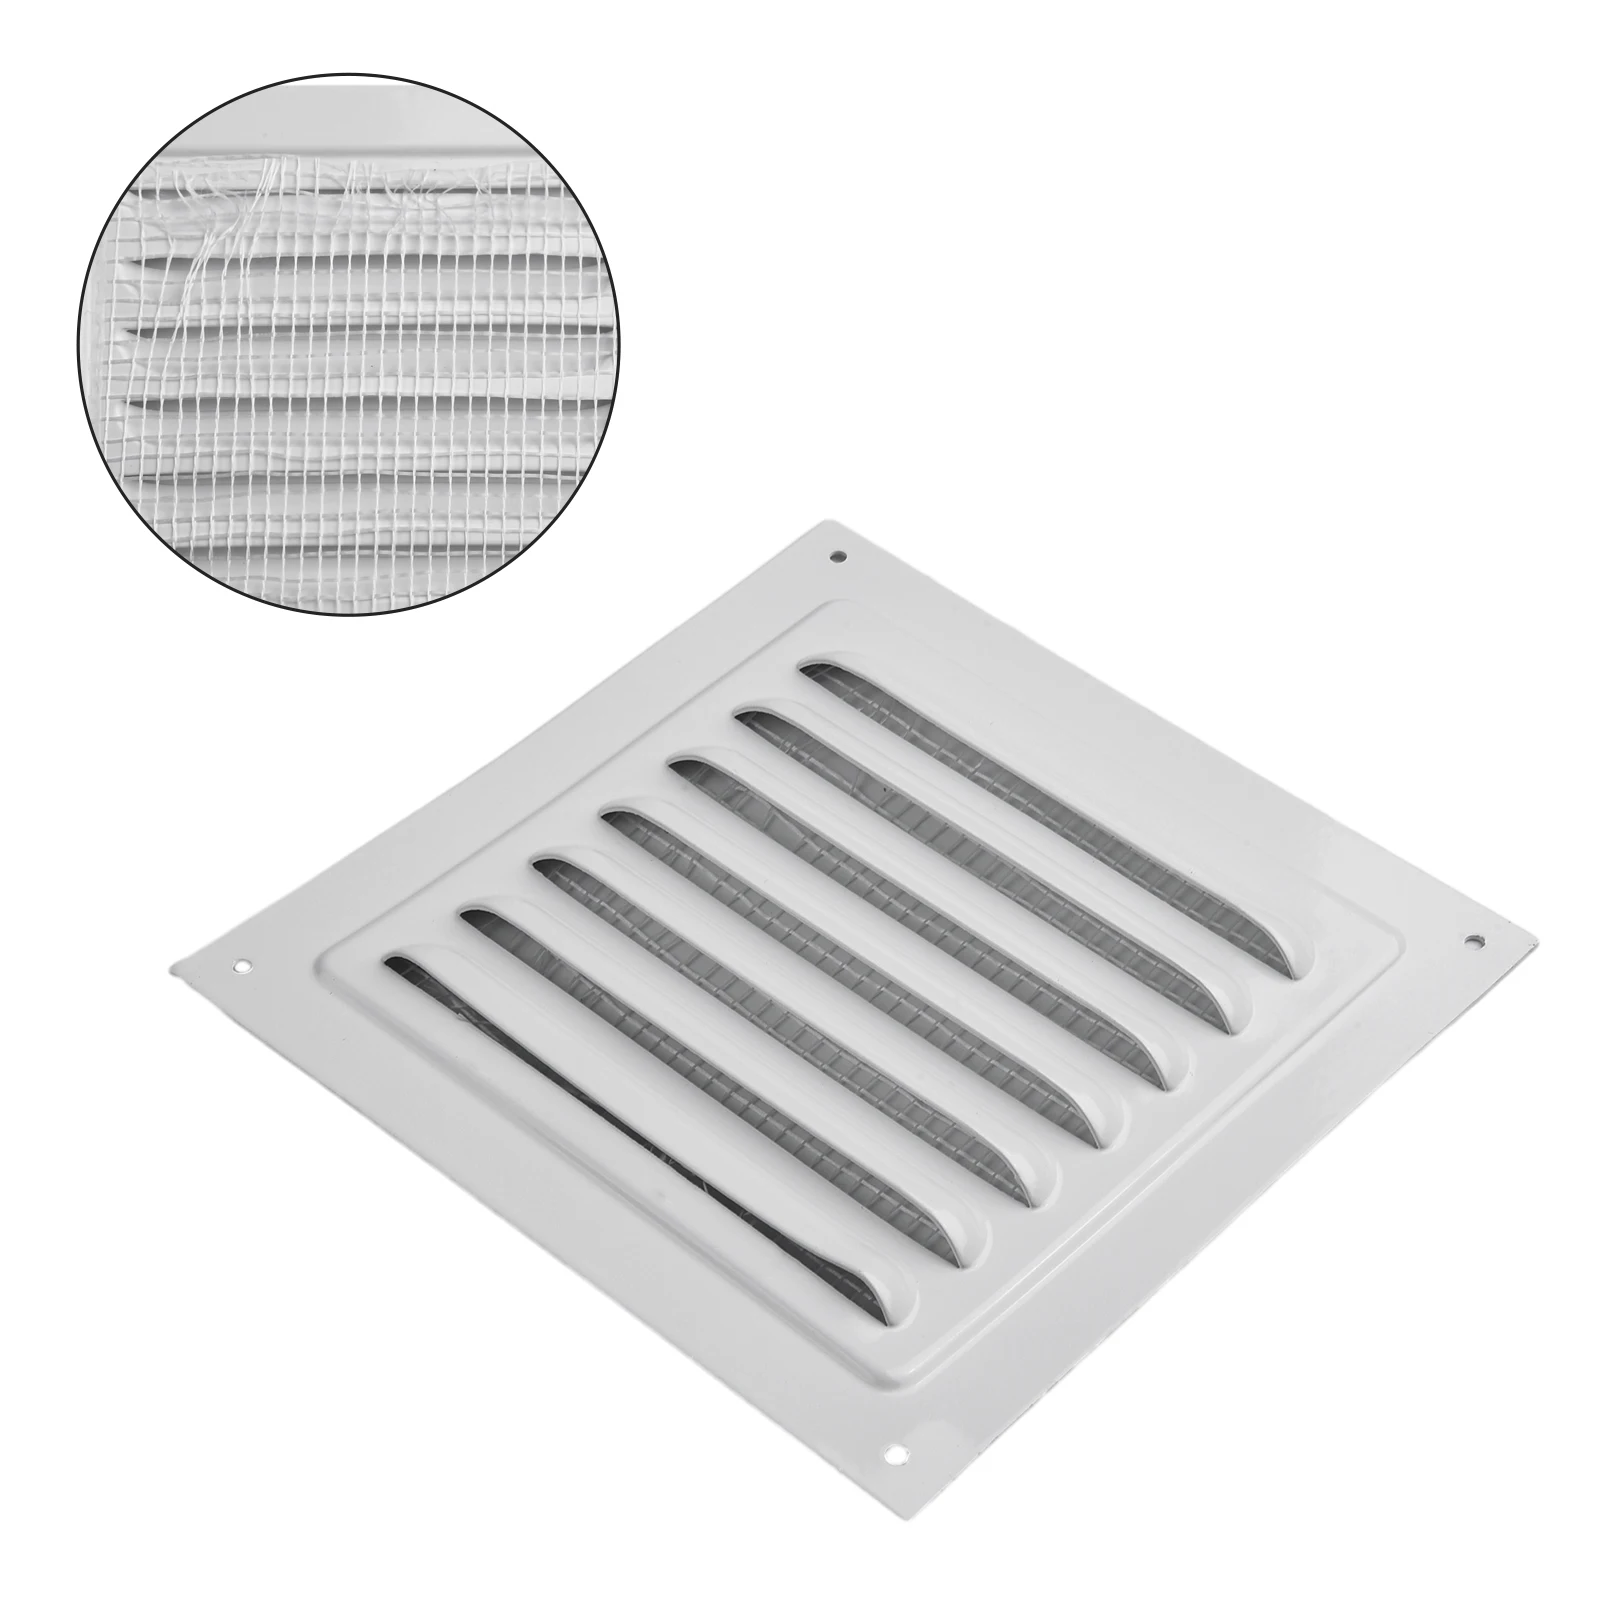 

Secure and Reliable Protection with this Aluminum Metal Louver Vent Grille Cover Square Insect Screen Included